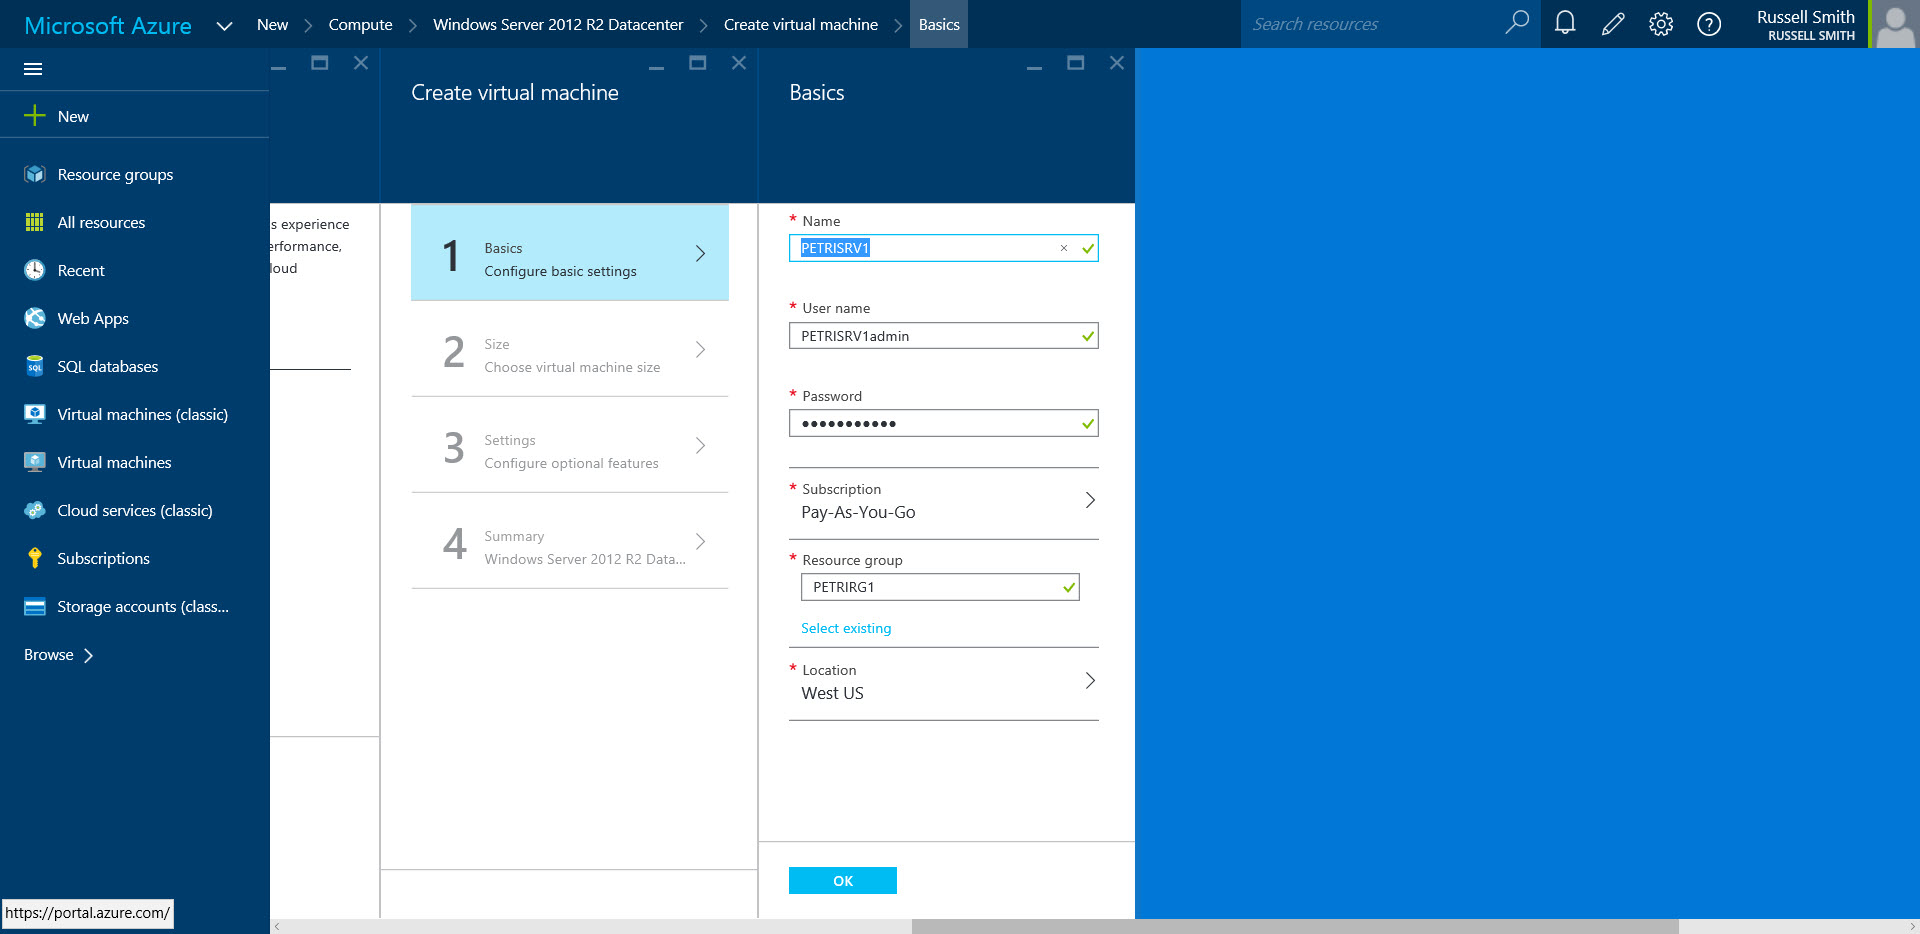 Configure the VM's basic settings in Azure (Image Credit: Russell Smith)